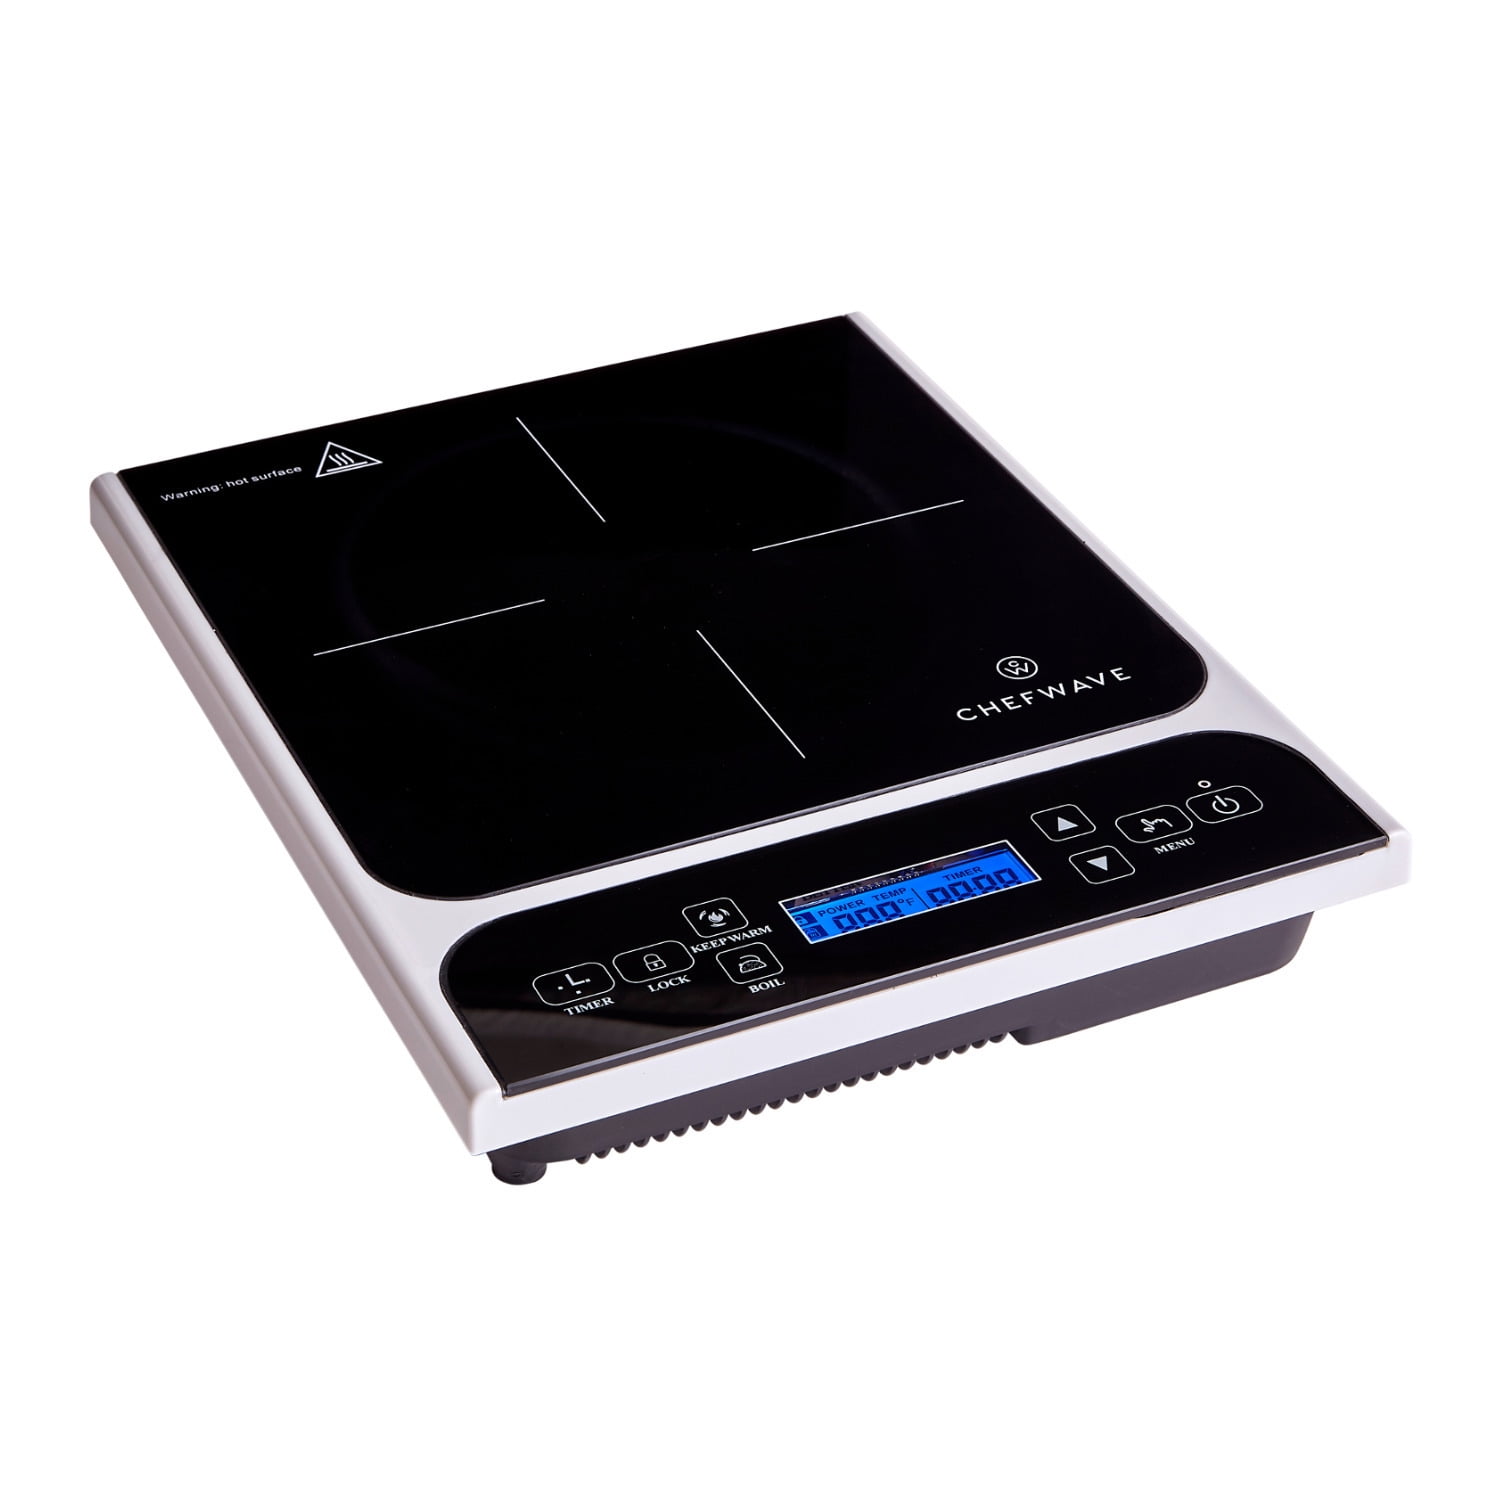  Commercial Induction Cooktop Professional,Nafewin Single Burner  Portable,Countertop Burner Induction Hot Plate with LCD Sensor Touch 1800  Watts: Home & Kitchen